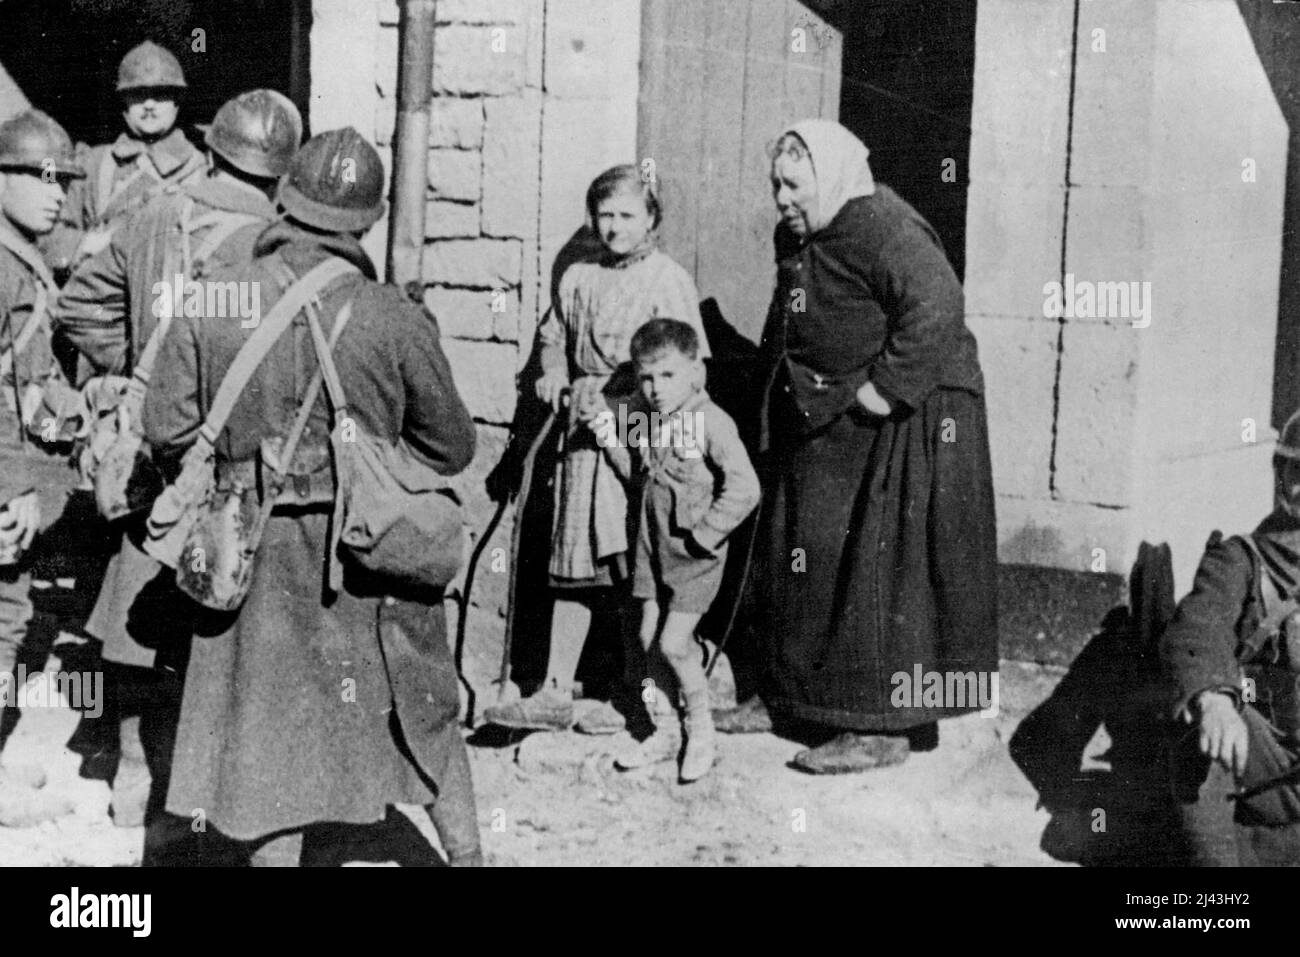 With The French Troops in Germany: An old German peasant woman and her grand children watching French soldiers who captured her village. October 14, 1939. (Photo by Keystone). Stock Photo